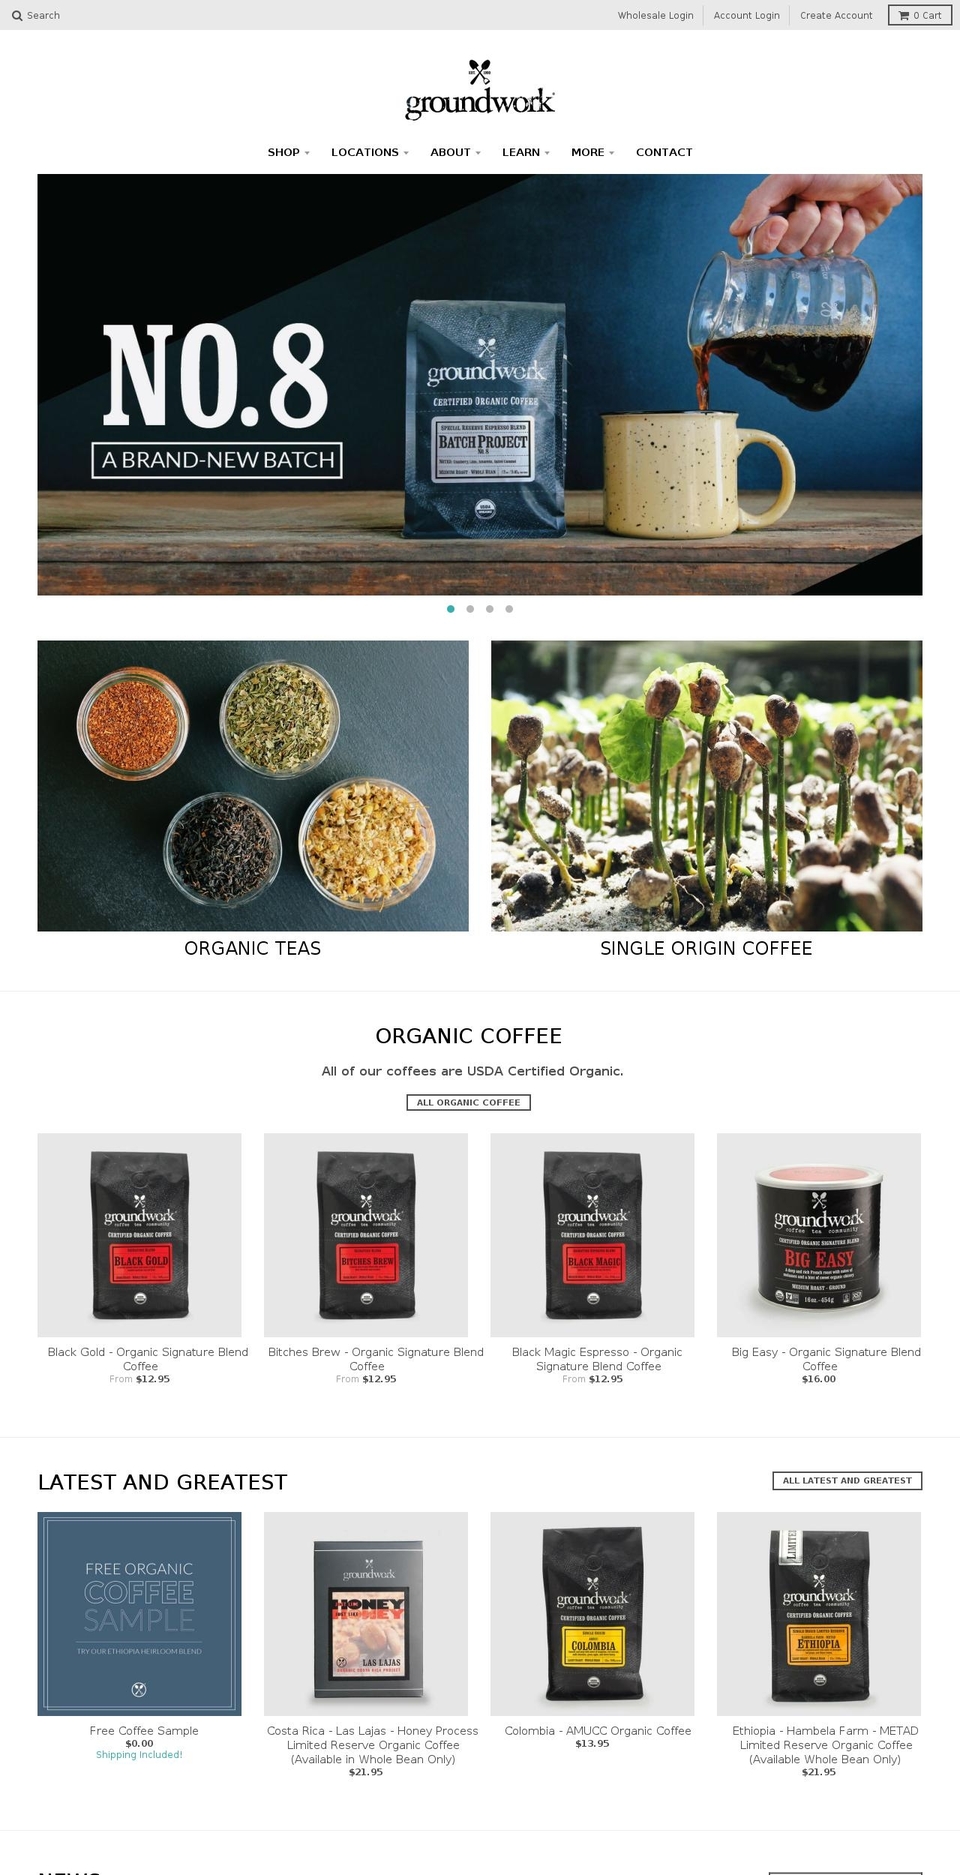 LudKing Dev - New Popup Shopify theme site example groundworkcoffee.com